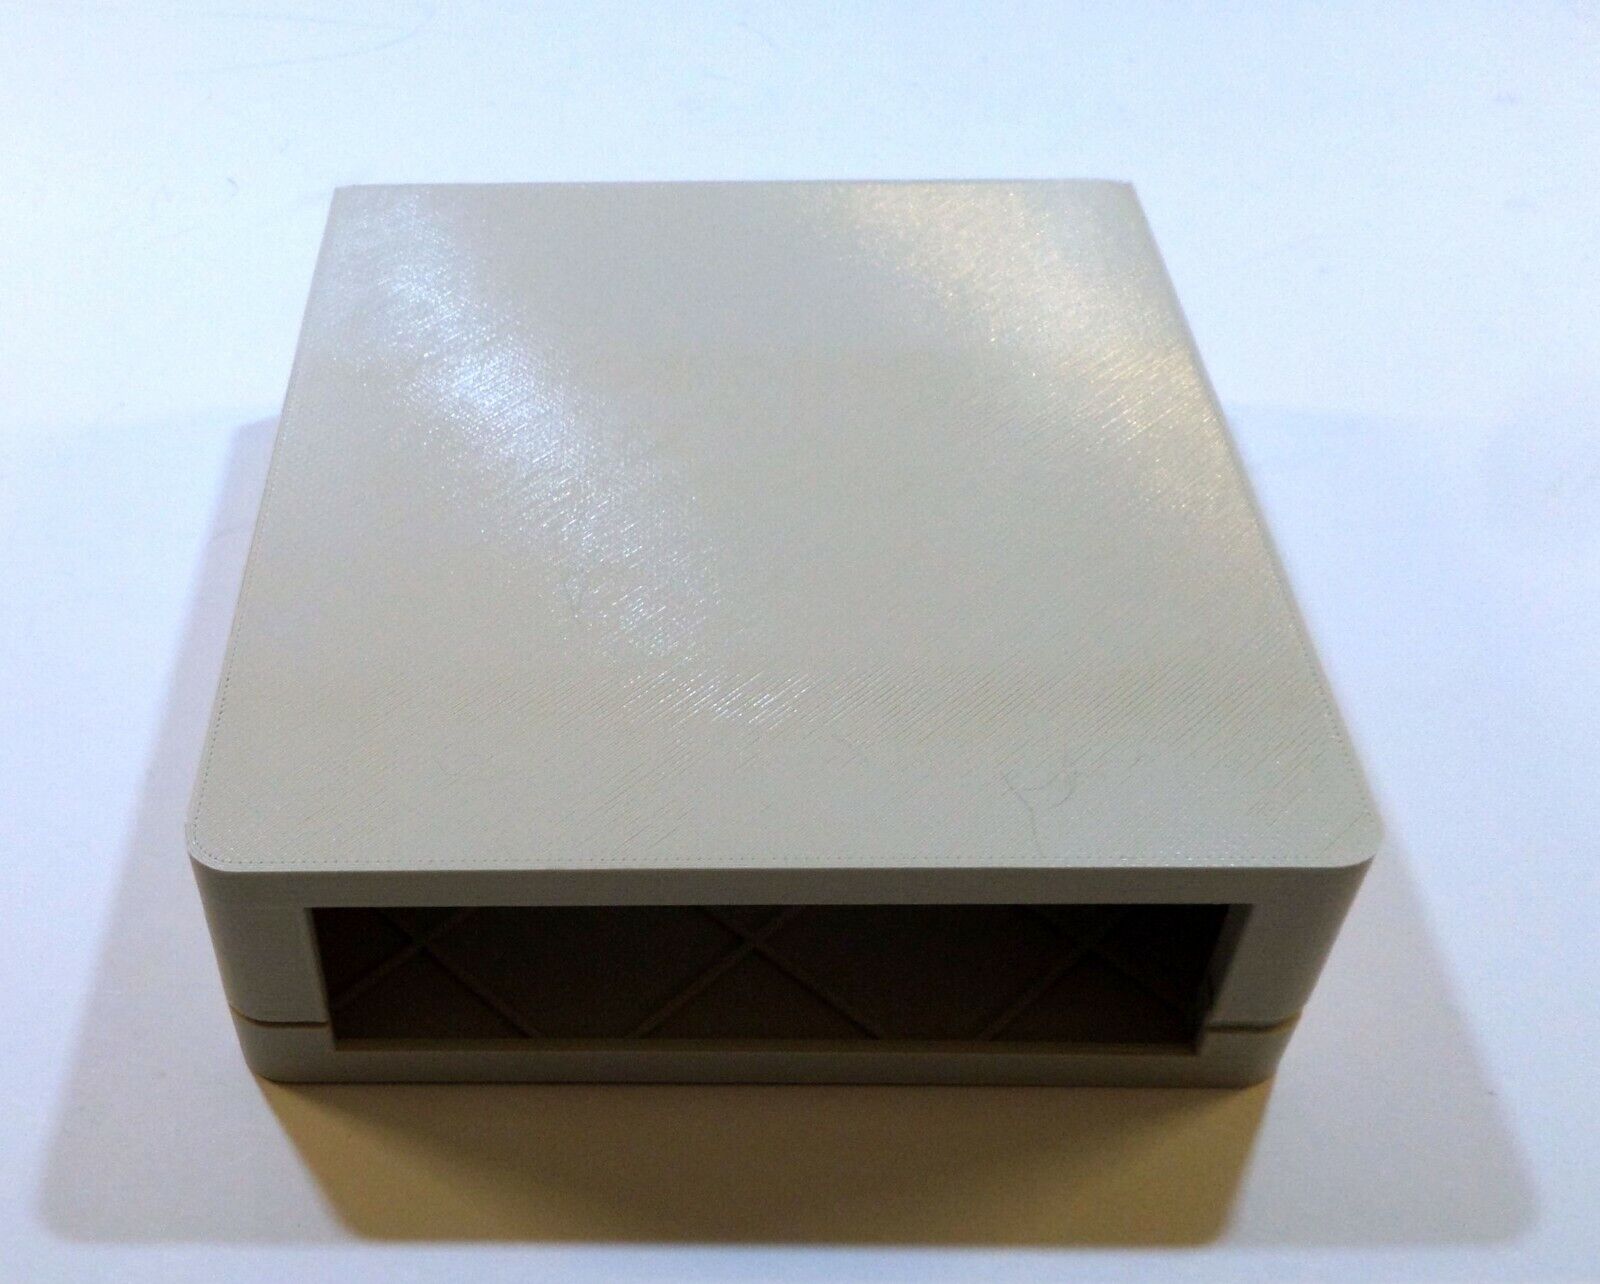 External Floppy Drive Case in Amiga Beige - for the Gotek or actual Floppy Drive